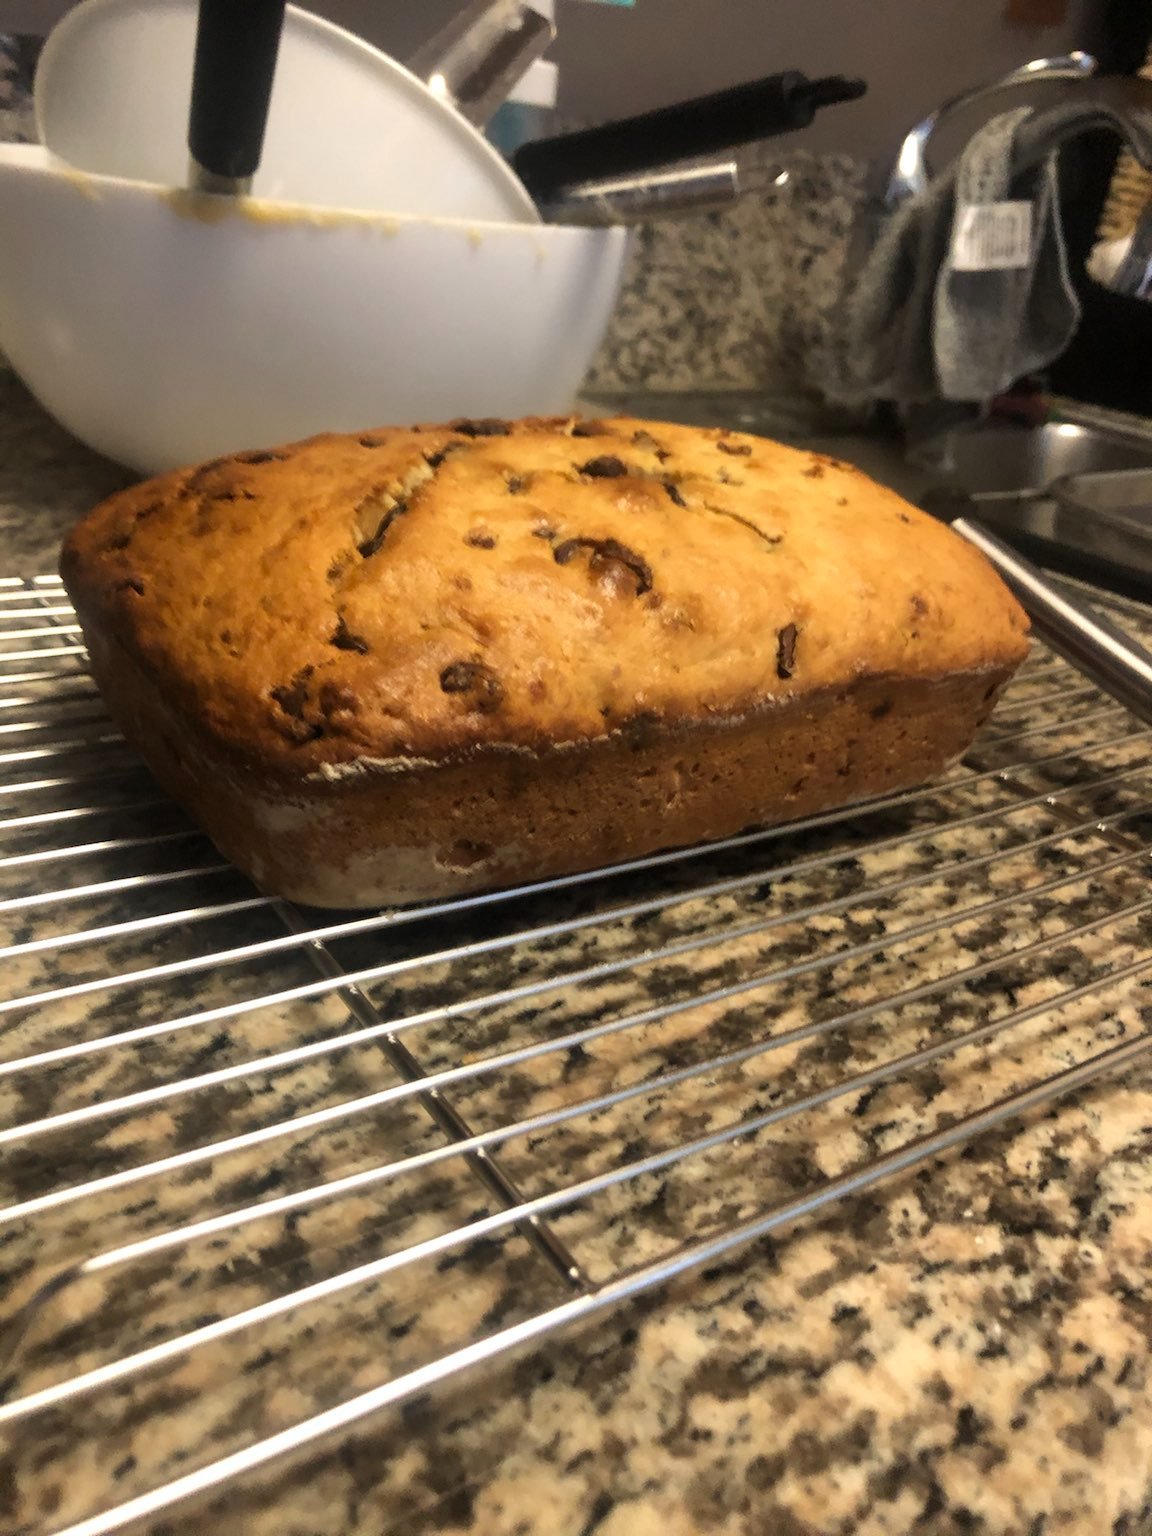 A loaf of banana bread with chocolate chips. I made it to take with us on the camping trip. It ended up being killer for my first try!